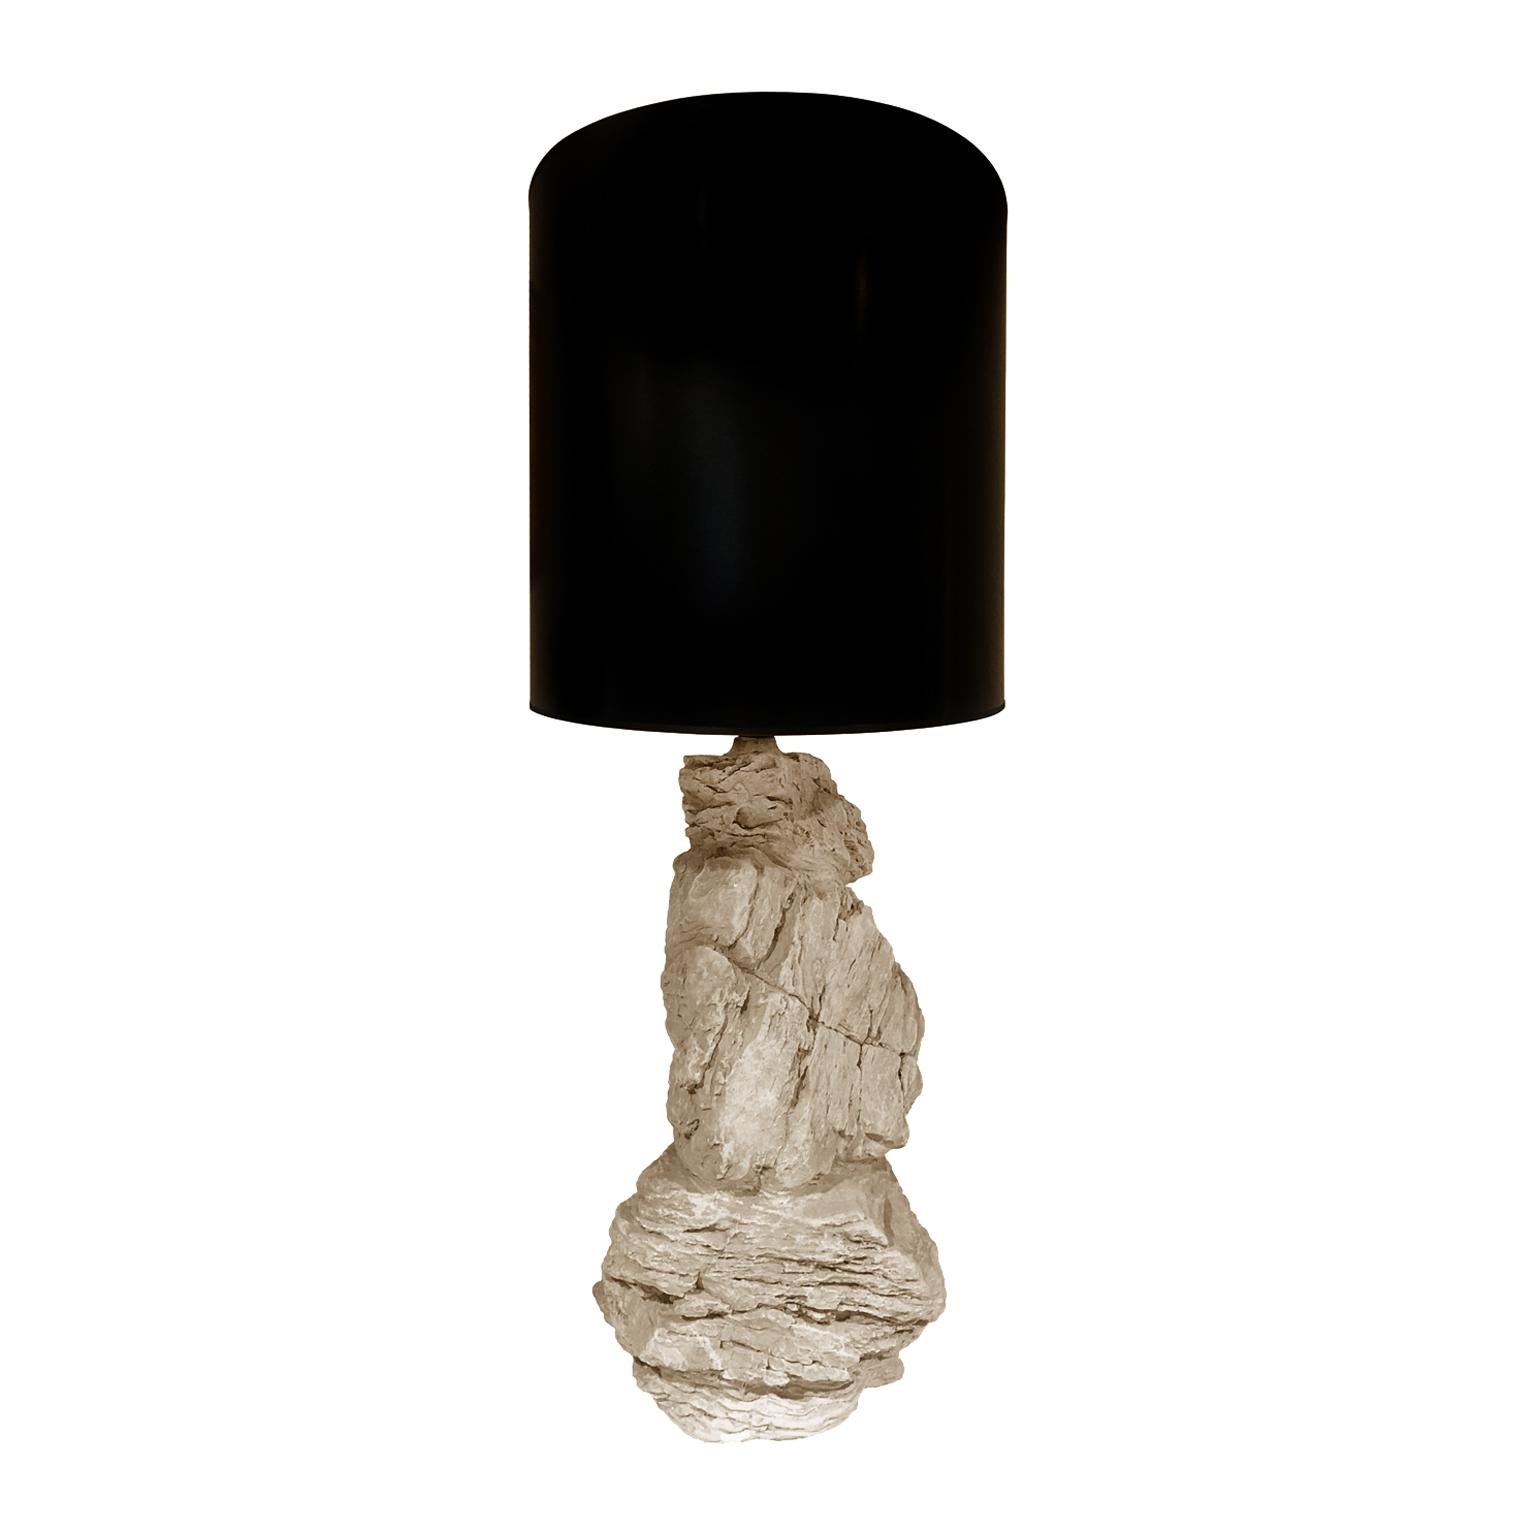 Plaster rock lamp in original finish with black oval shade. Marked 